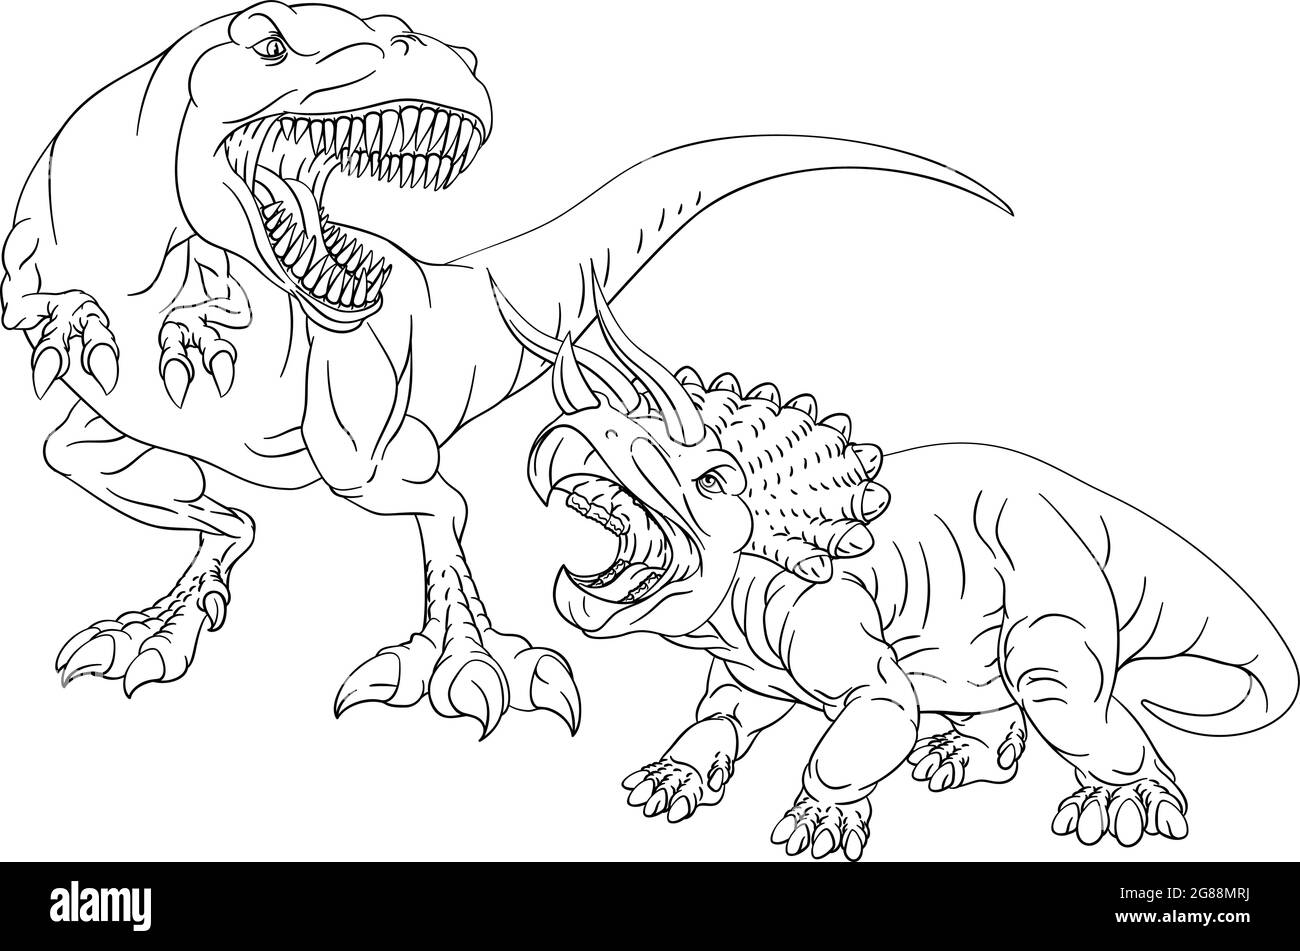 Coloring Book Page Dinosaurs In Outline Stock Vector